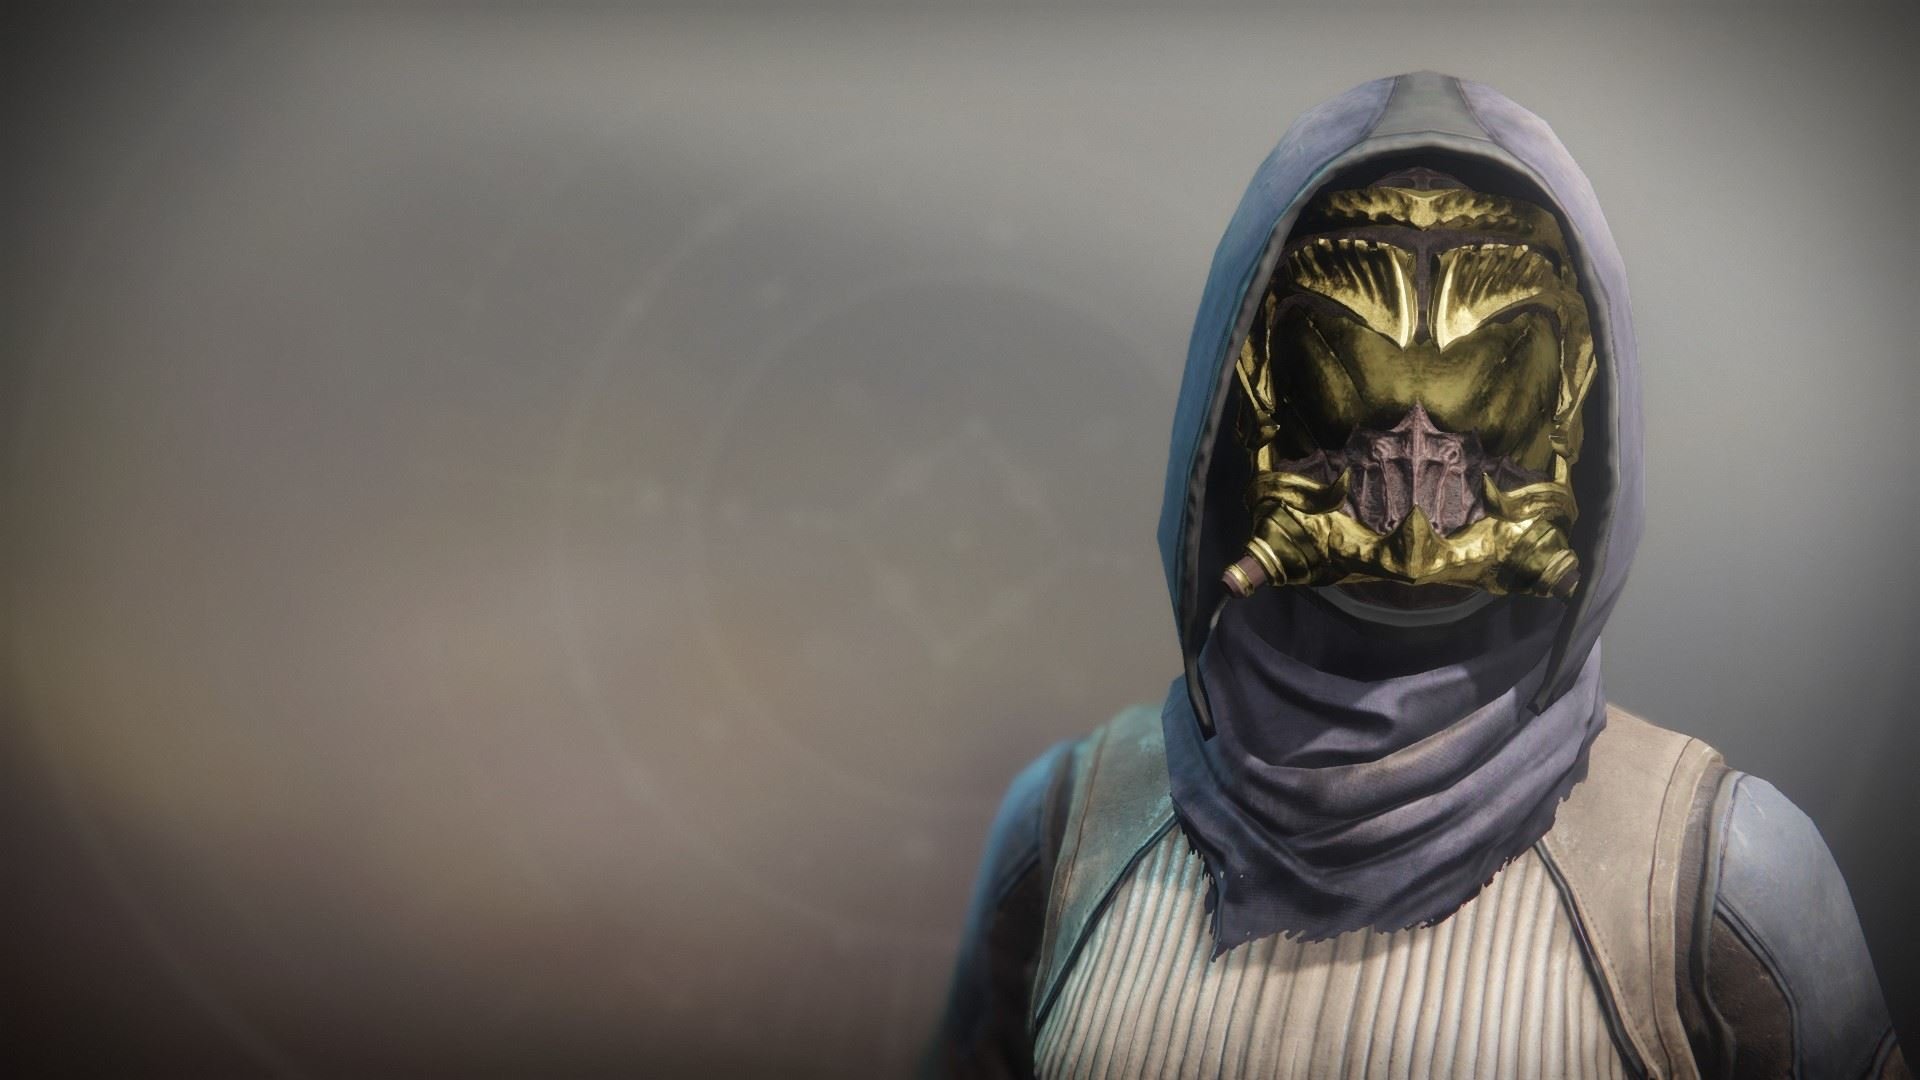 An in-game render of the Wormhusk Crown.